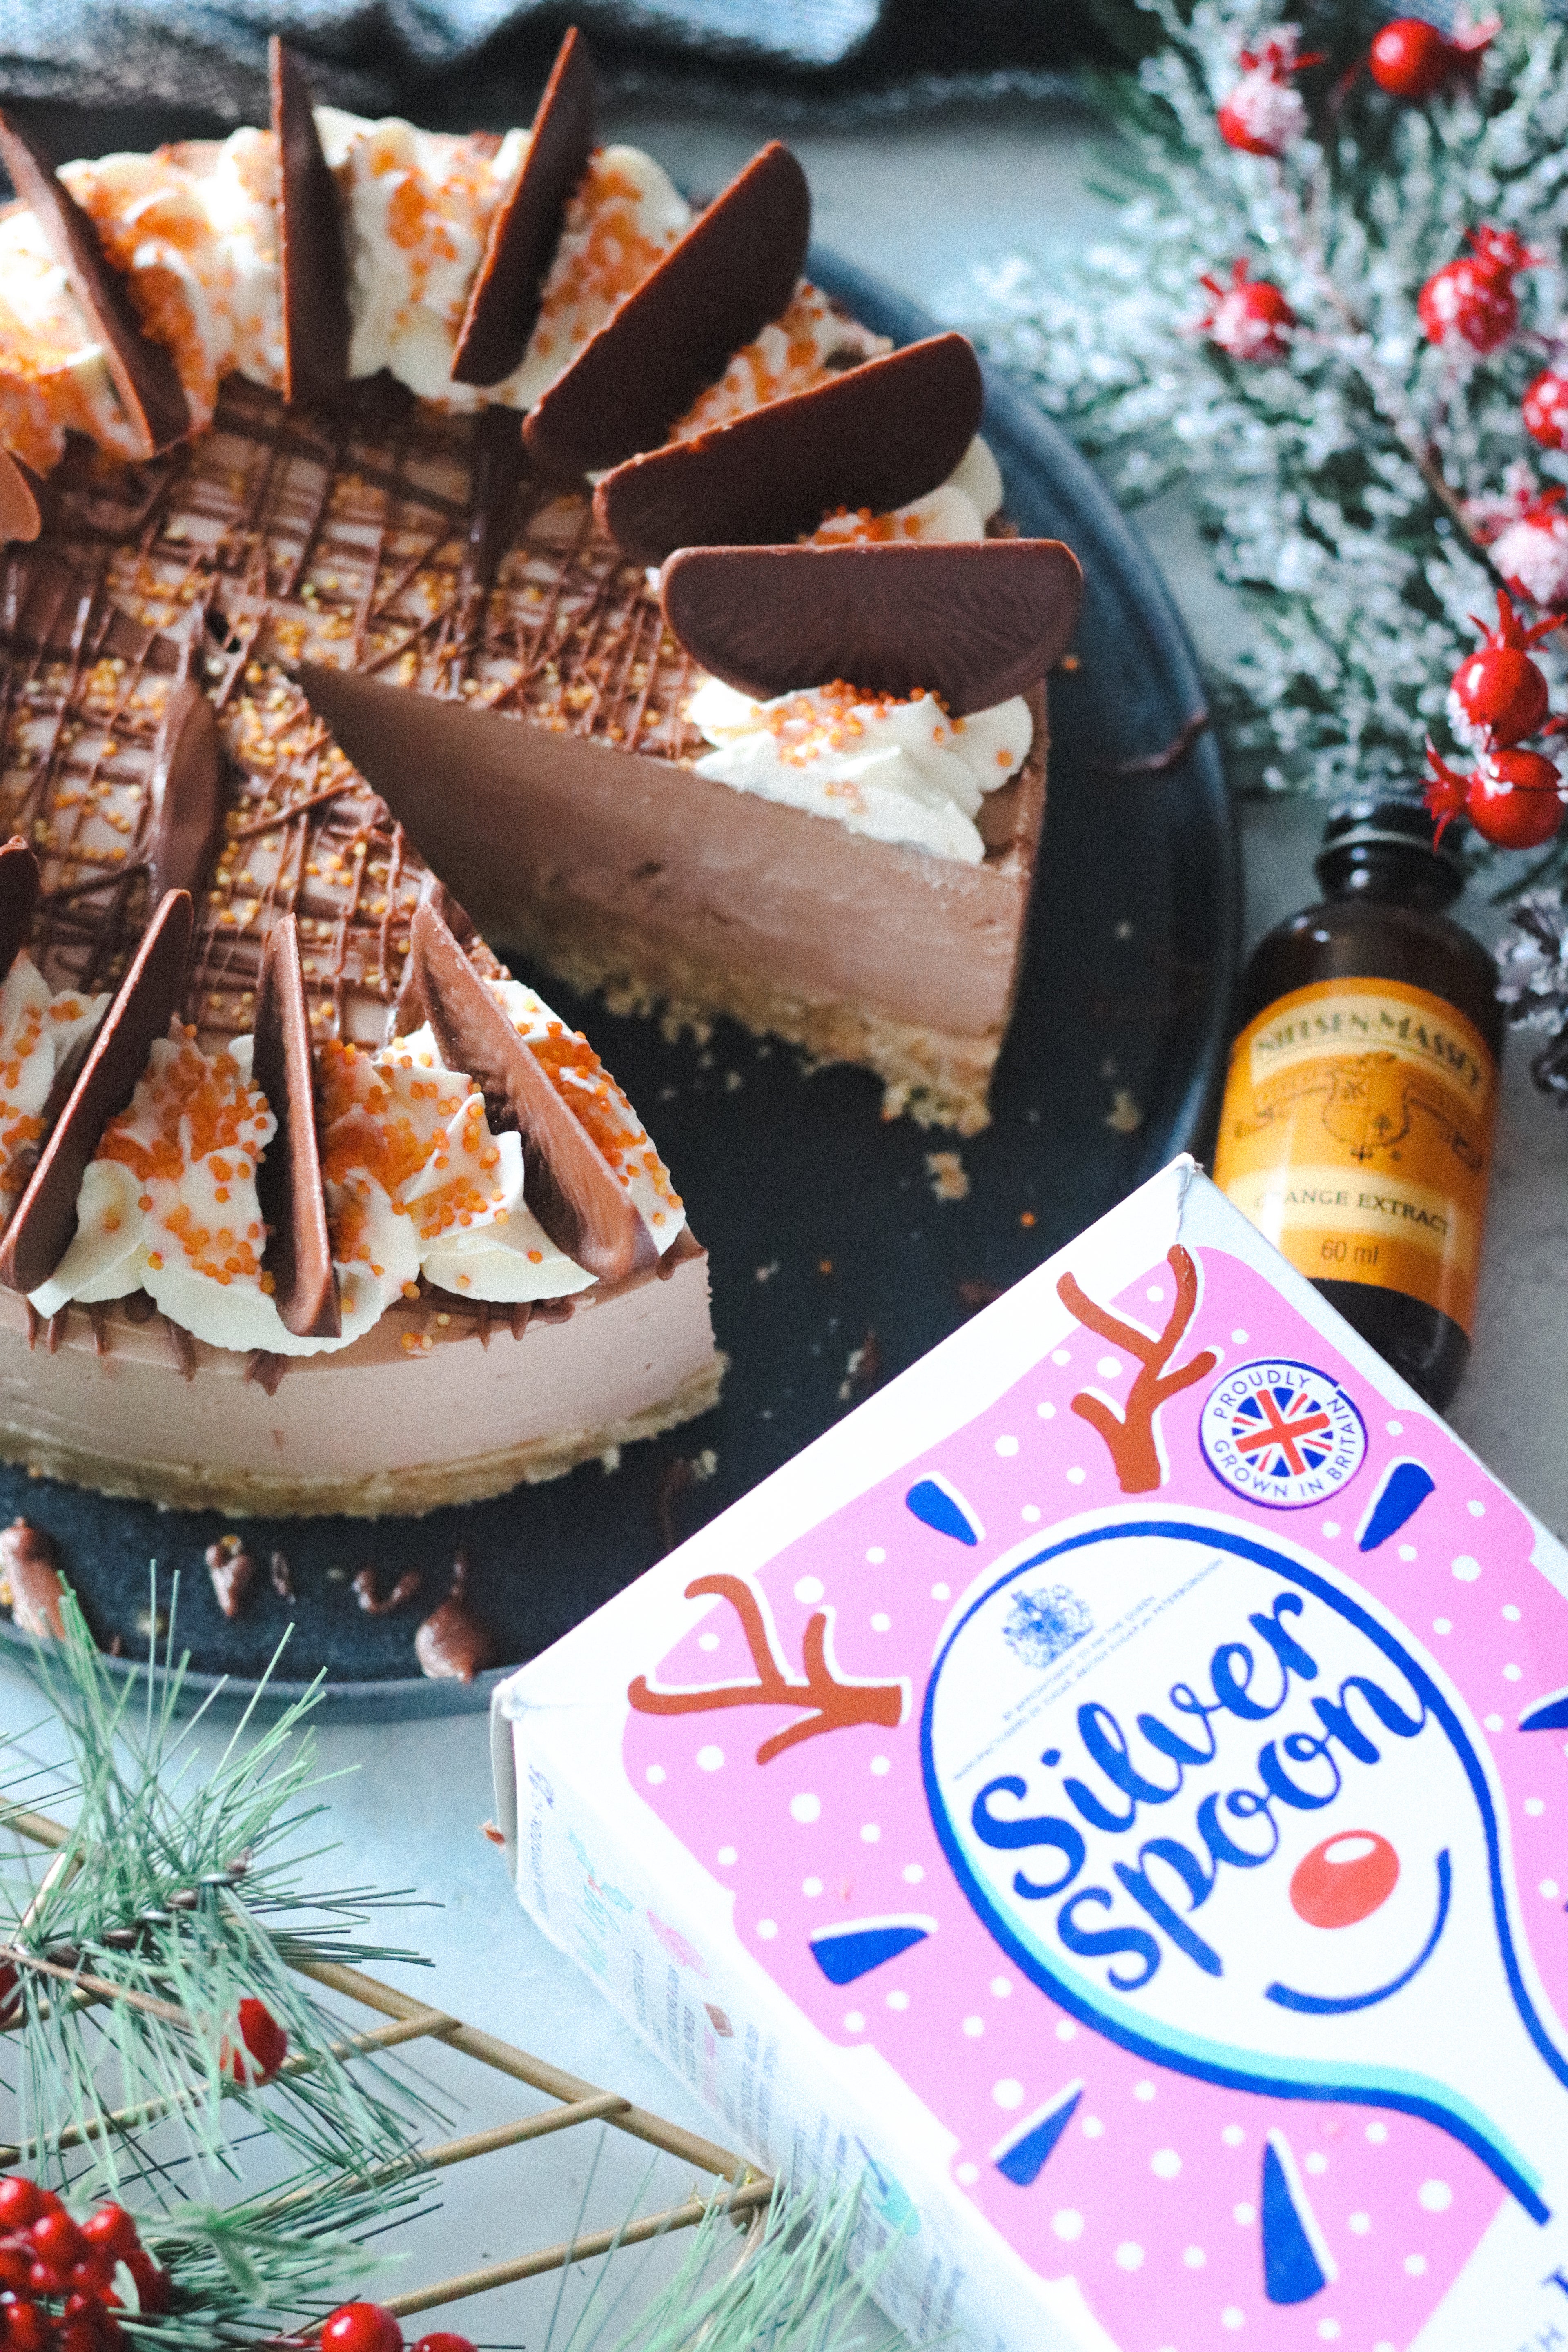 Top view of Chocolate Orange Cheesecake next to a box of Silver Spoon Icing Sugar, and a bottle of Nielsen-Massey Orange extract